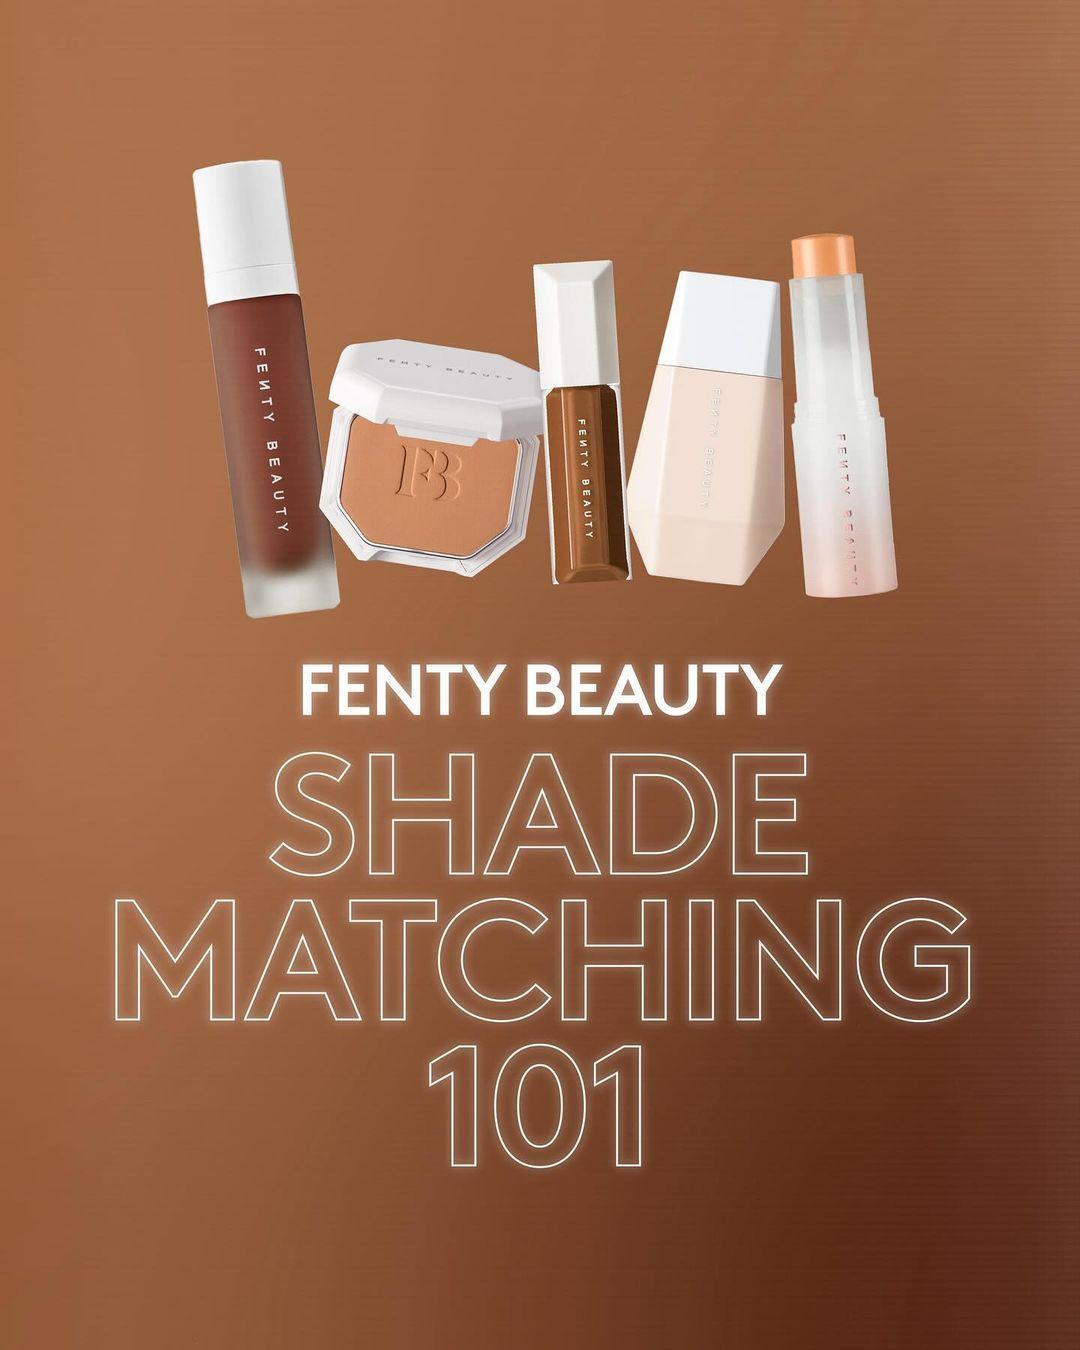 Shade Matching is ✨kind of✨ our thing 👏🏿👏🏽👏🏻 🖤 Swipe right to peep ALL the tips, tricks + tools you can use to #FindYourFentyMatch, boo! 💯 And don’t forget to save this post for later. 

Shade Matching Tools ⤵️
💻 Tap into our Virtual Try-On tool on fentybeauty.com

💬 Slide into our Instagram DMs with “What’s my shade?” to take a short quiz to find your foundation shade OR #FentyConcealer to find your We’re Even shade 

🤳🏾 Head over to our TikTok @fentybeauty to try our #ProFiltr and #EazeDrop Shade Matching filters

🛍️Head to your local @sephora or @UltaBeauty to get shade-matched IRL

✨ Compare the #ProFiltr collection with the #EazeDrop collection to find your perfect match

✨ Use your #ProFiltr shade as a starting point to find your We’re Even concealer match